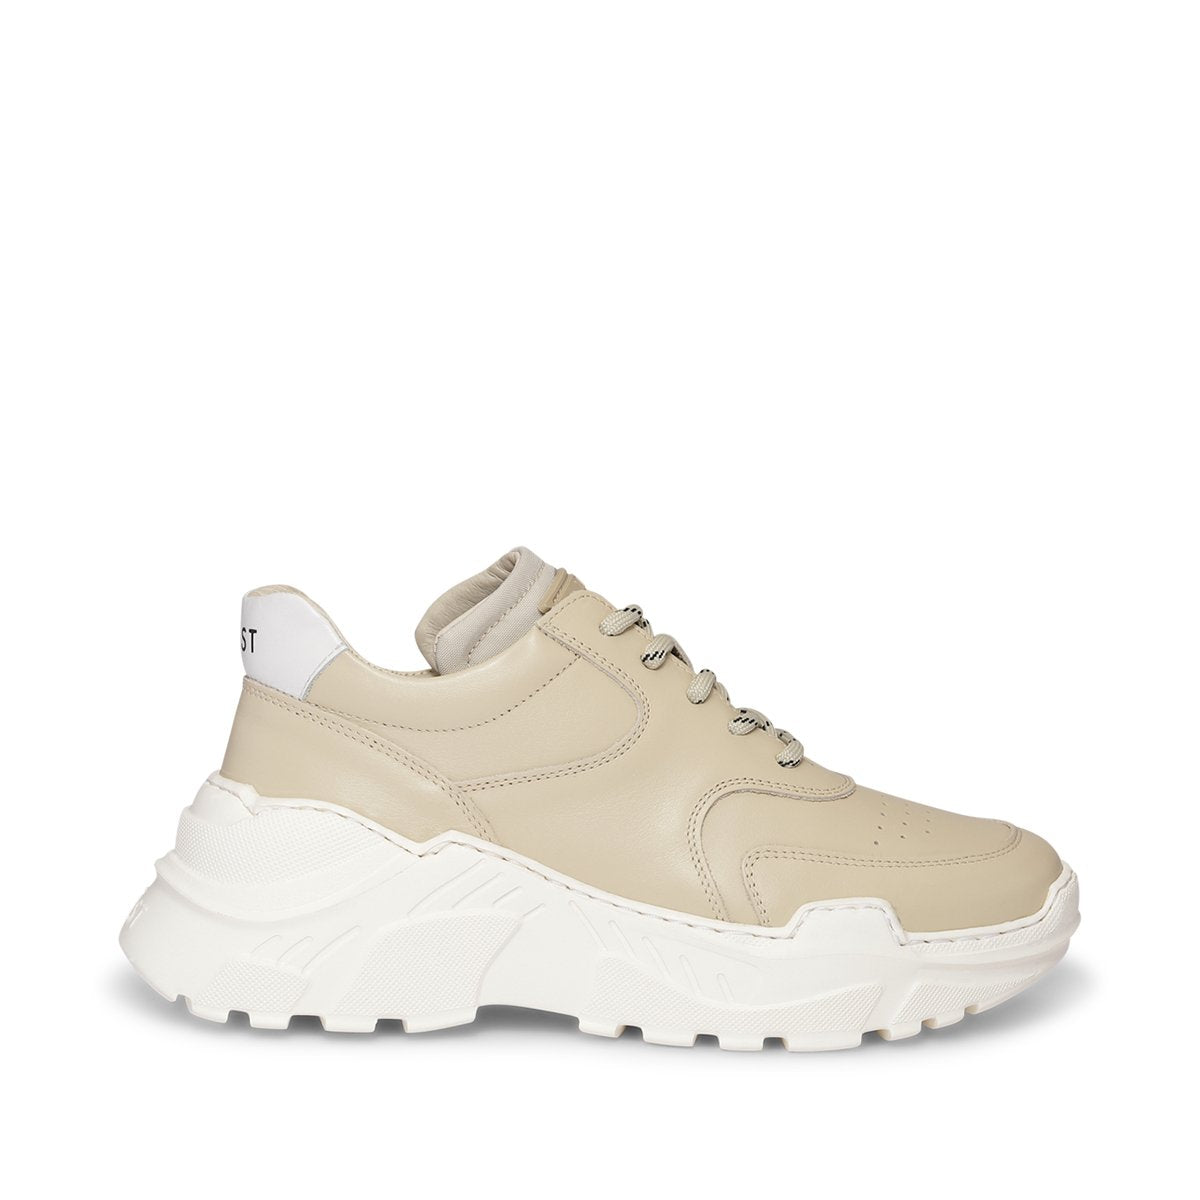 Sprint Leather Cream Chunky Sneakers LAST1198 - 1